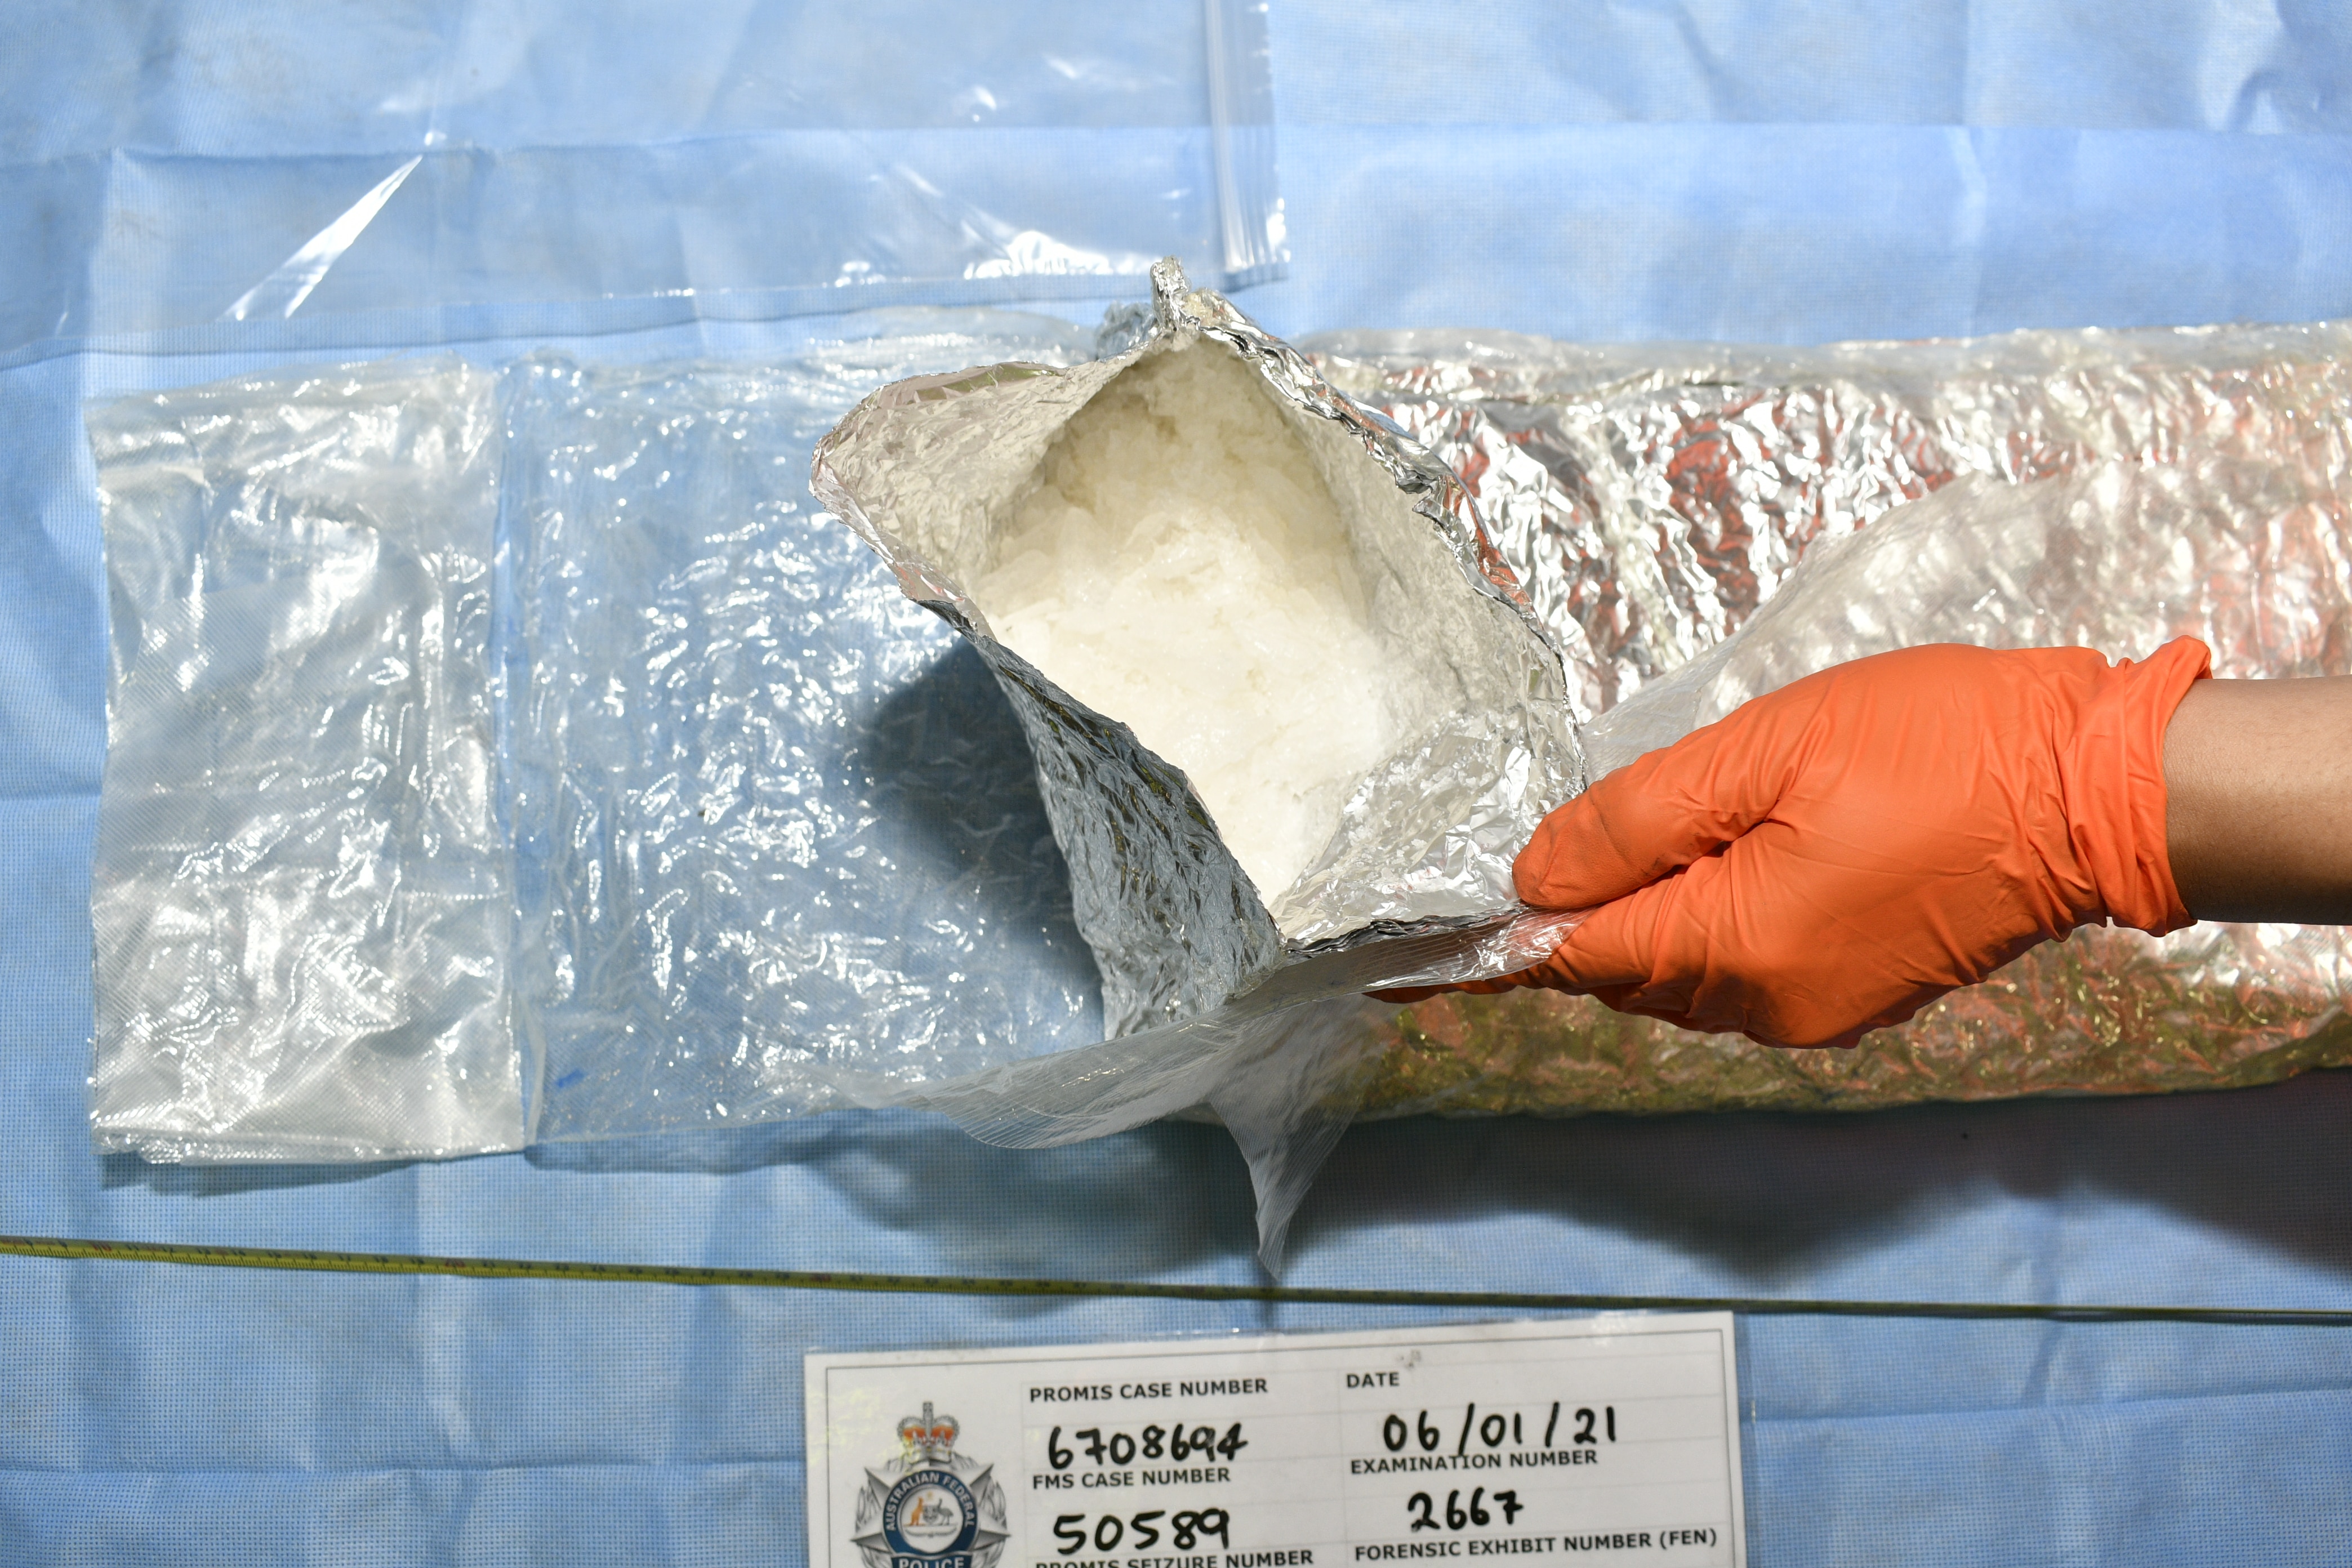 A total of 81 packages wrapped in blue plastic containing 81kg of methamphetamine.